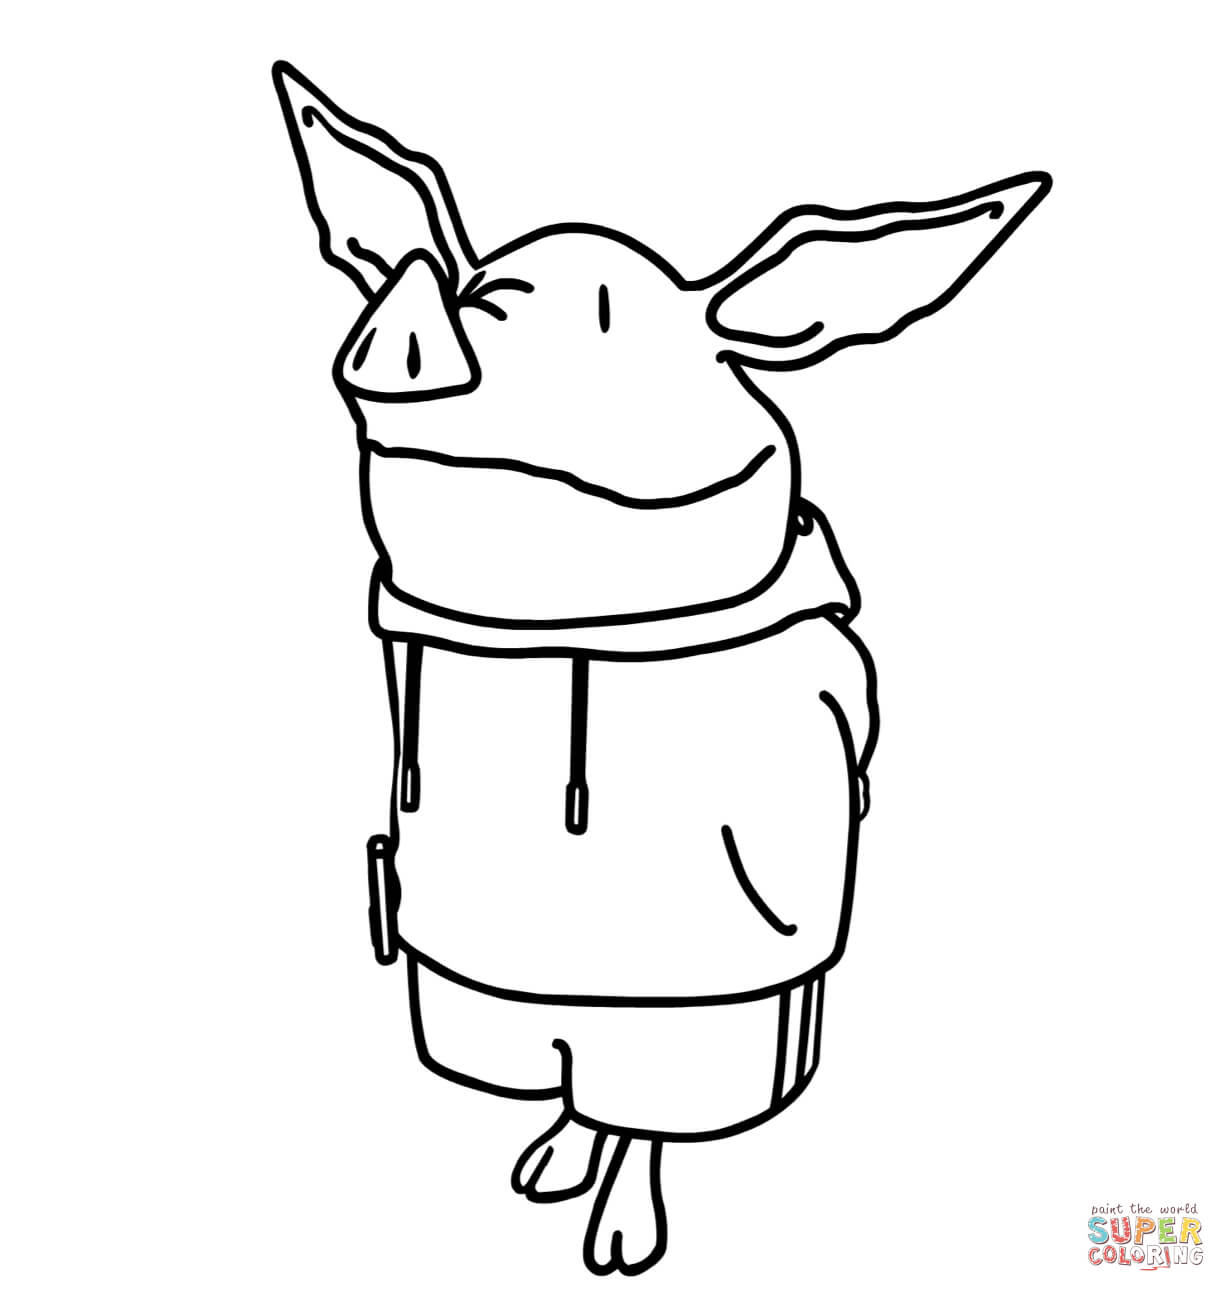 Olivia the Pig Coloring Page